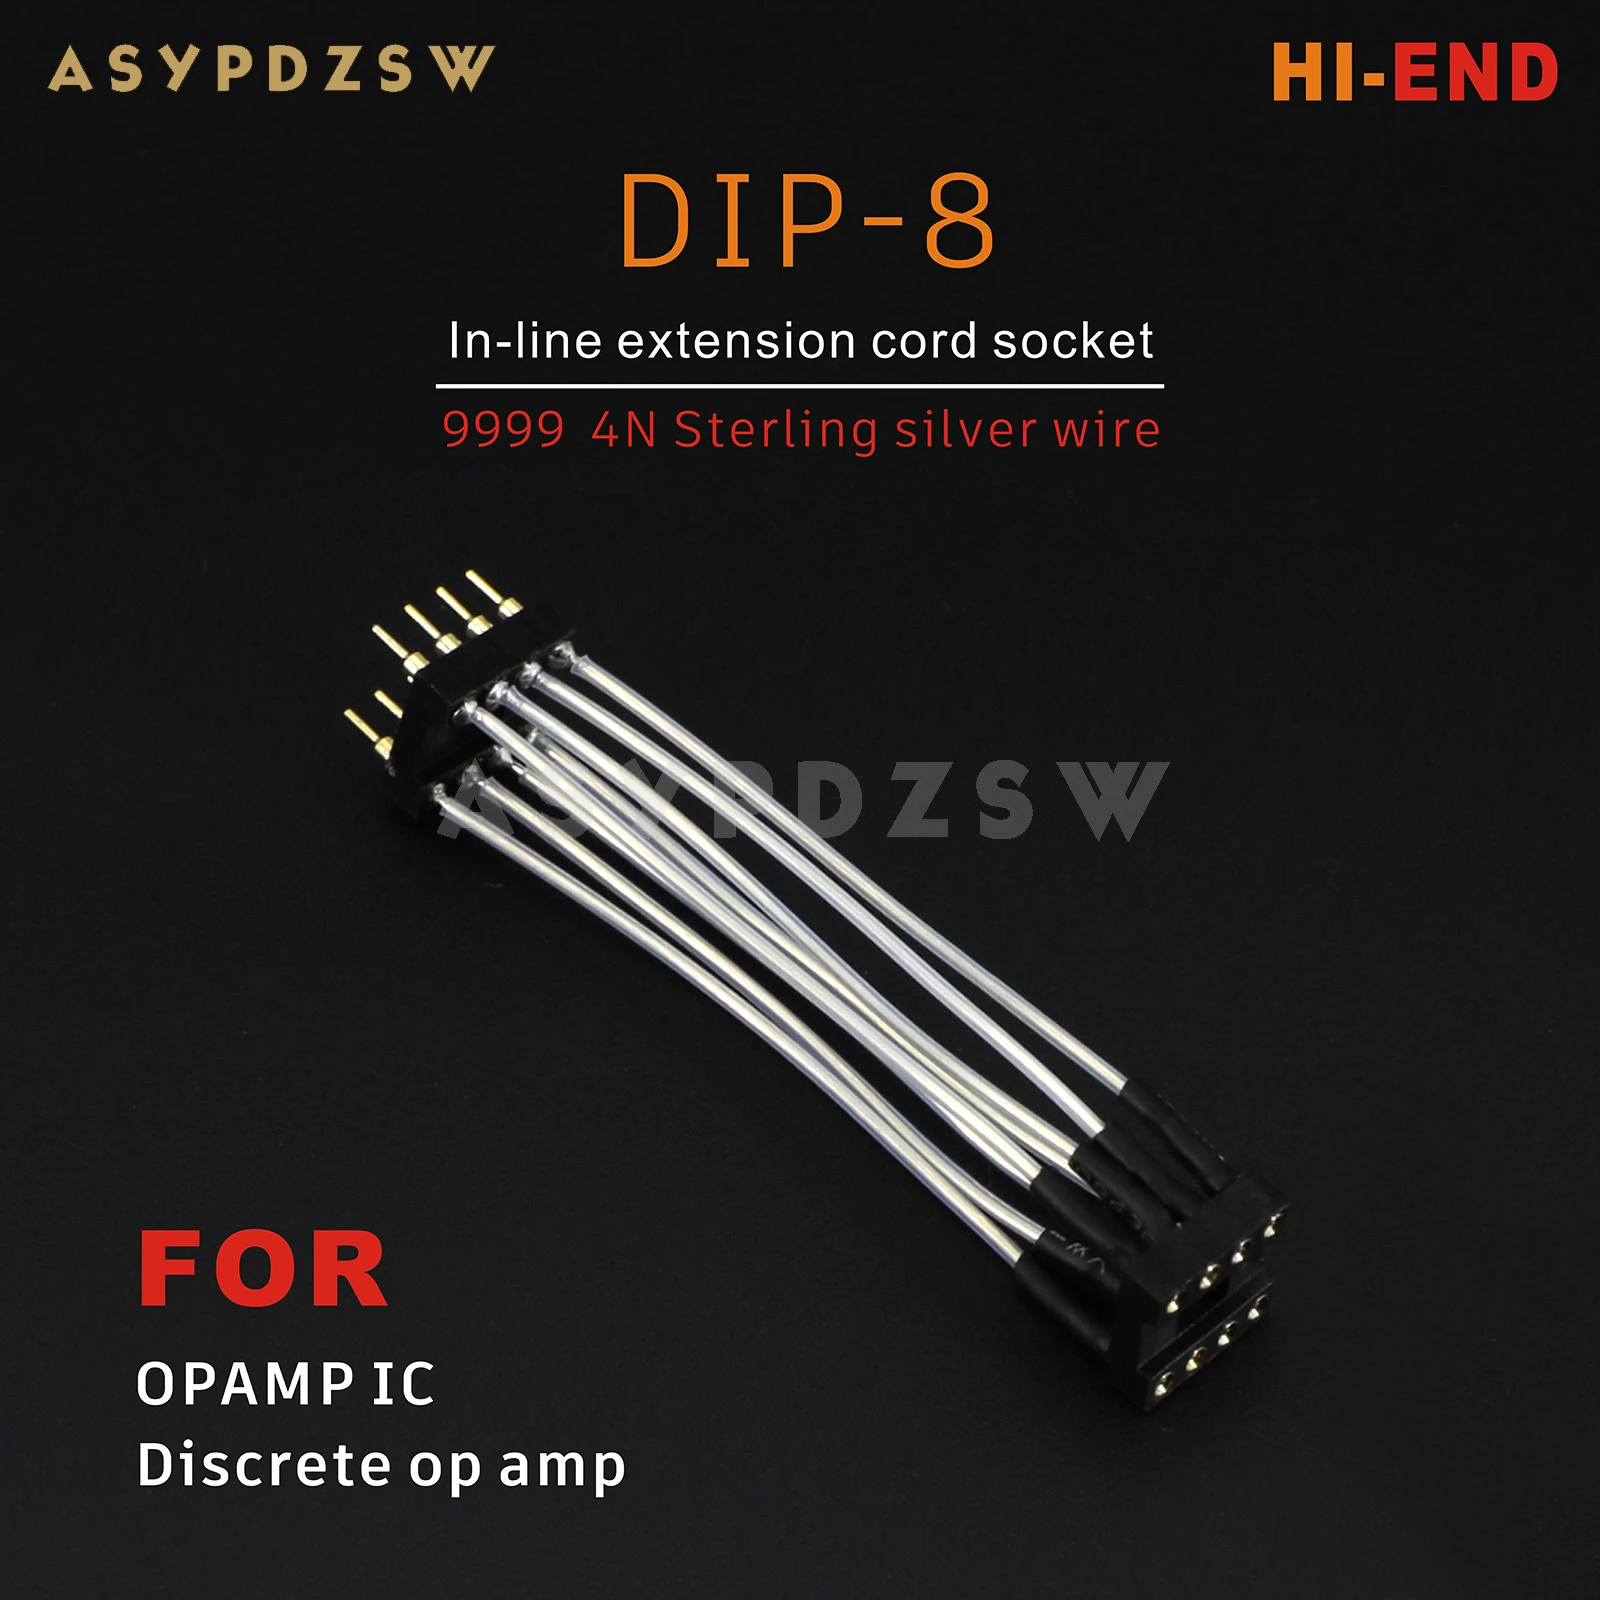 

HI-END 9999 4N Sterling silver wire DIP-8 PIN In-line extension cord socket For OPAMP IC Discrete op amp